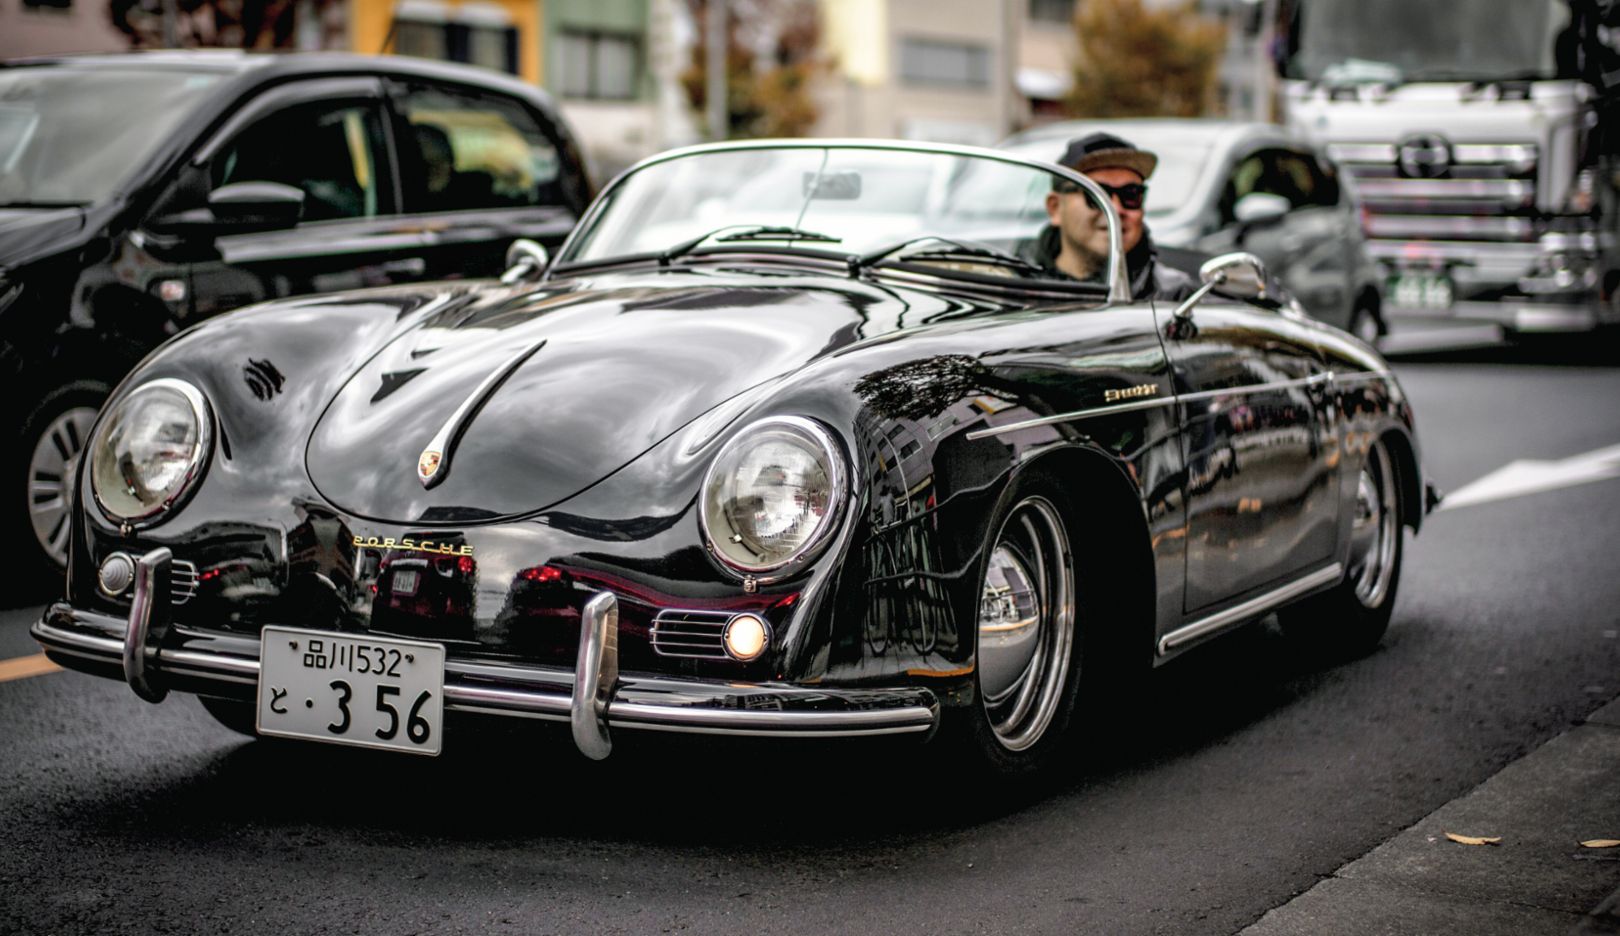 The moment: Chance encounter in Tokyo—a Porsche like this 356 Speedster is always a good motif. 